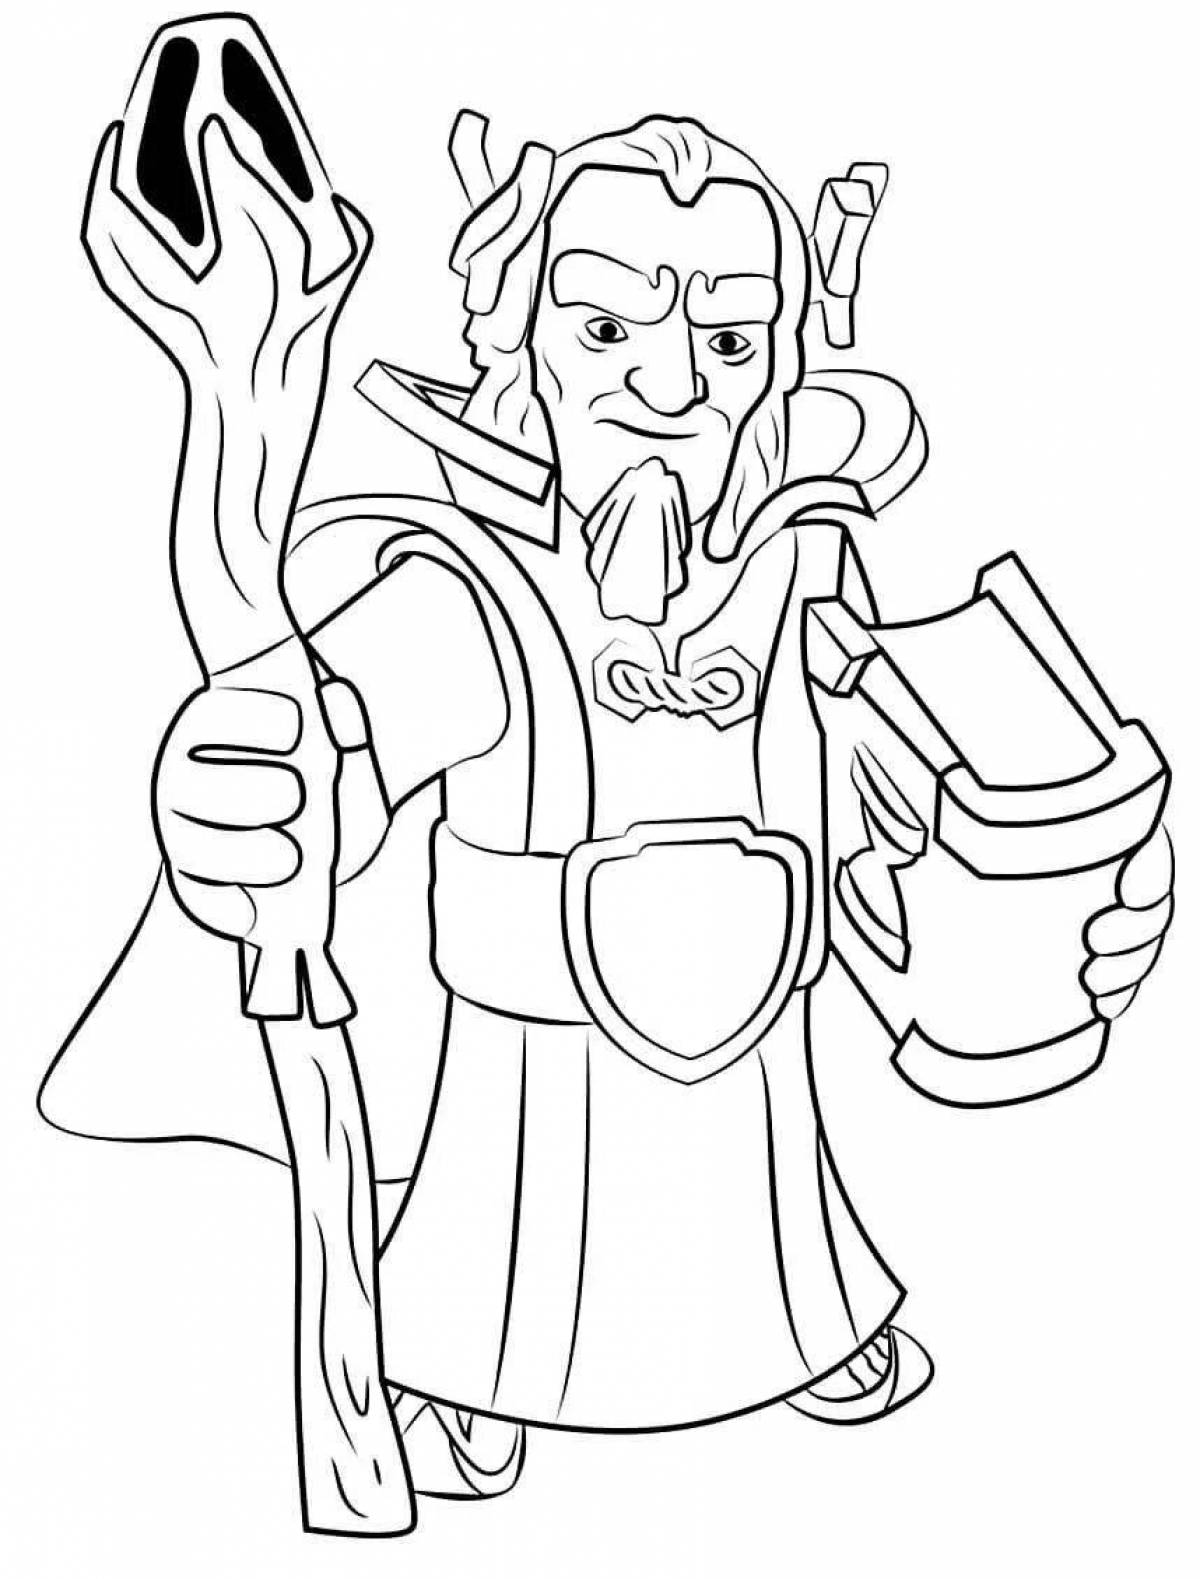 Awesome clash of clans coloring book